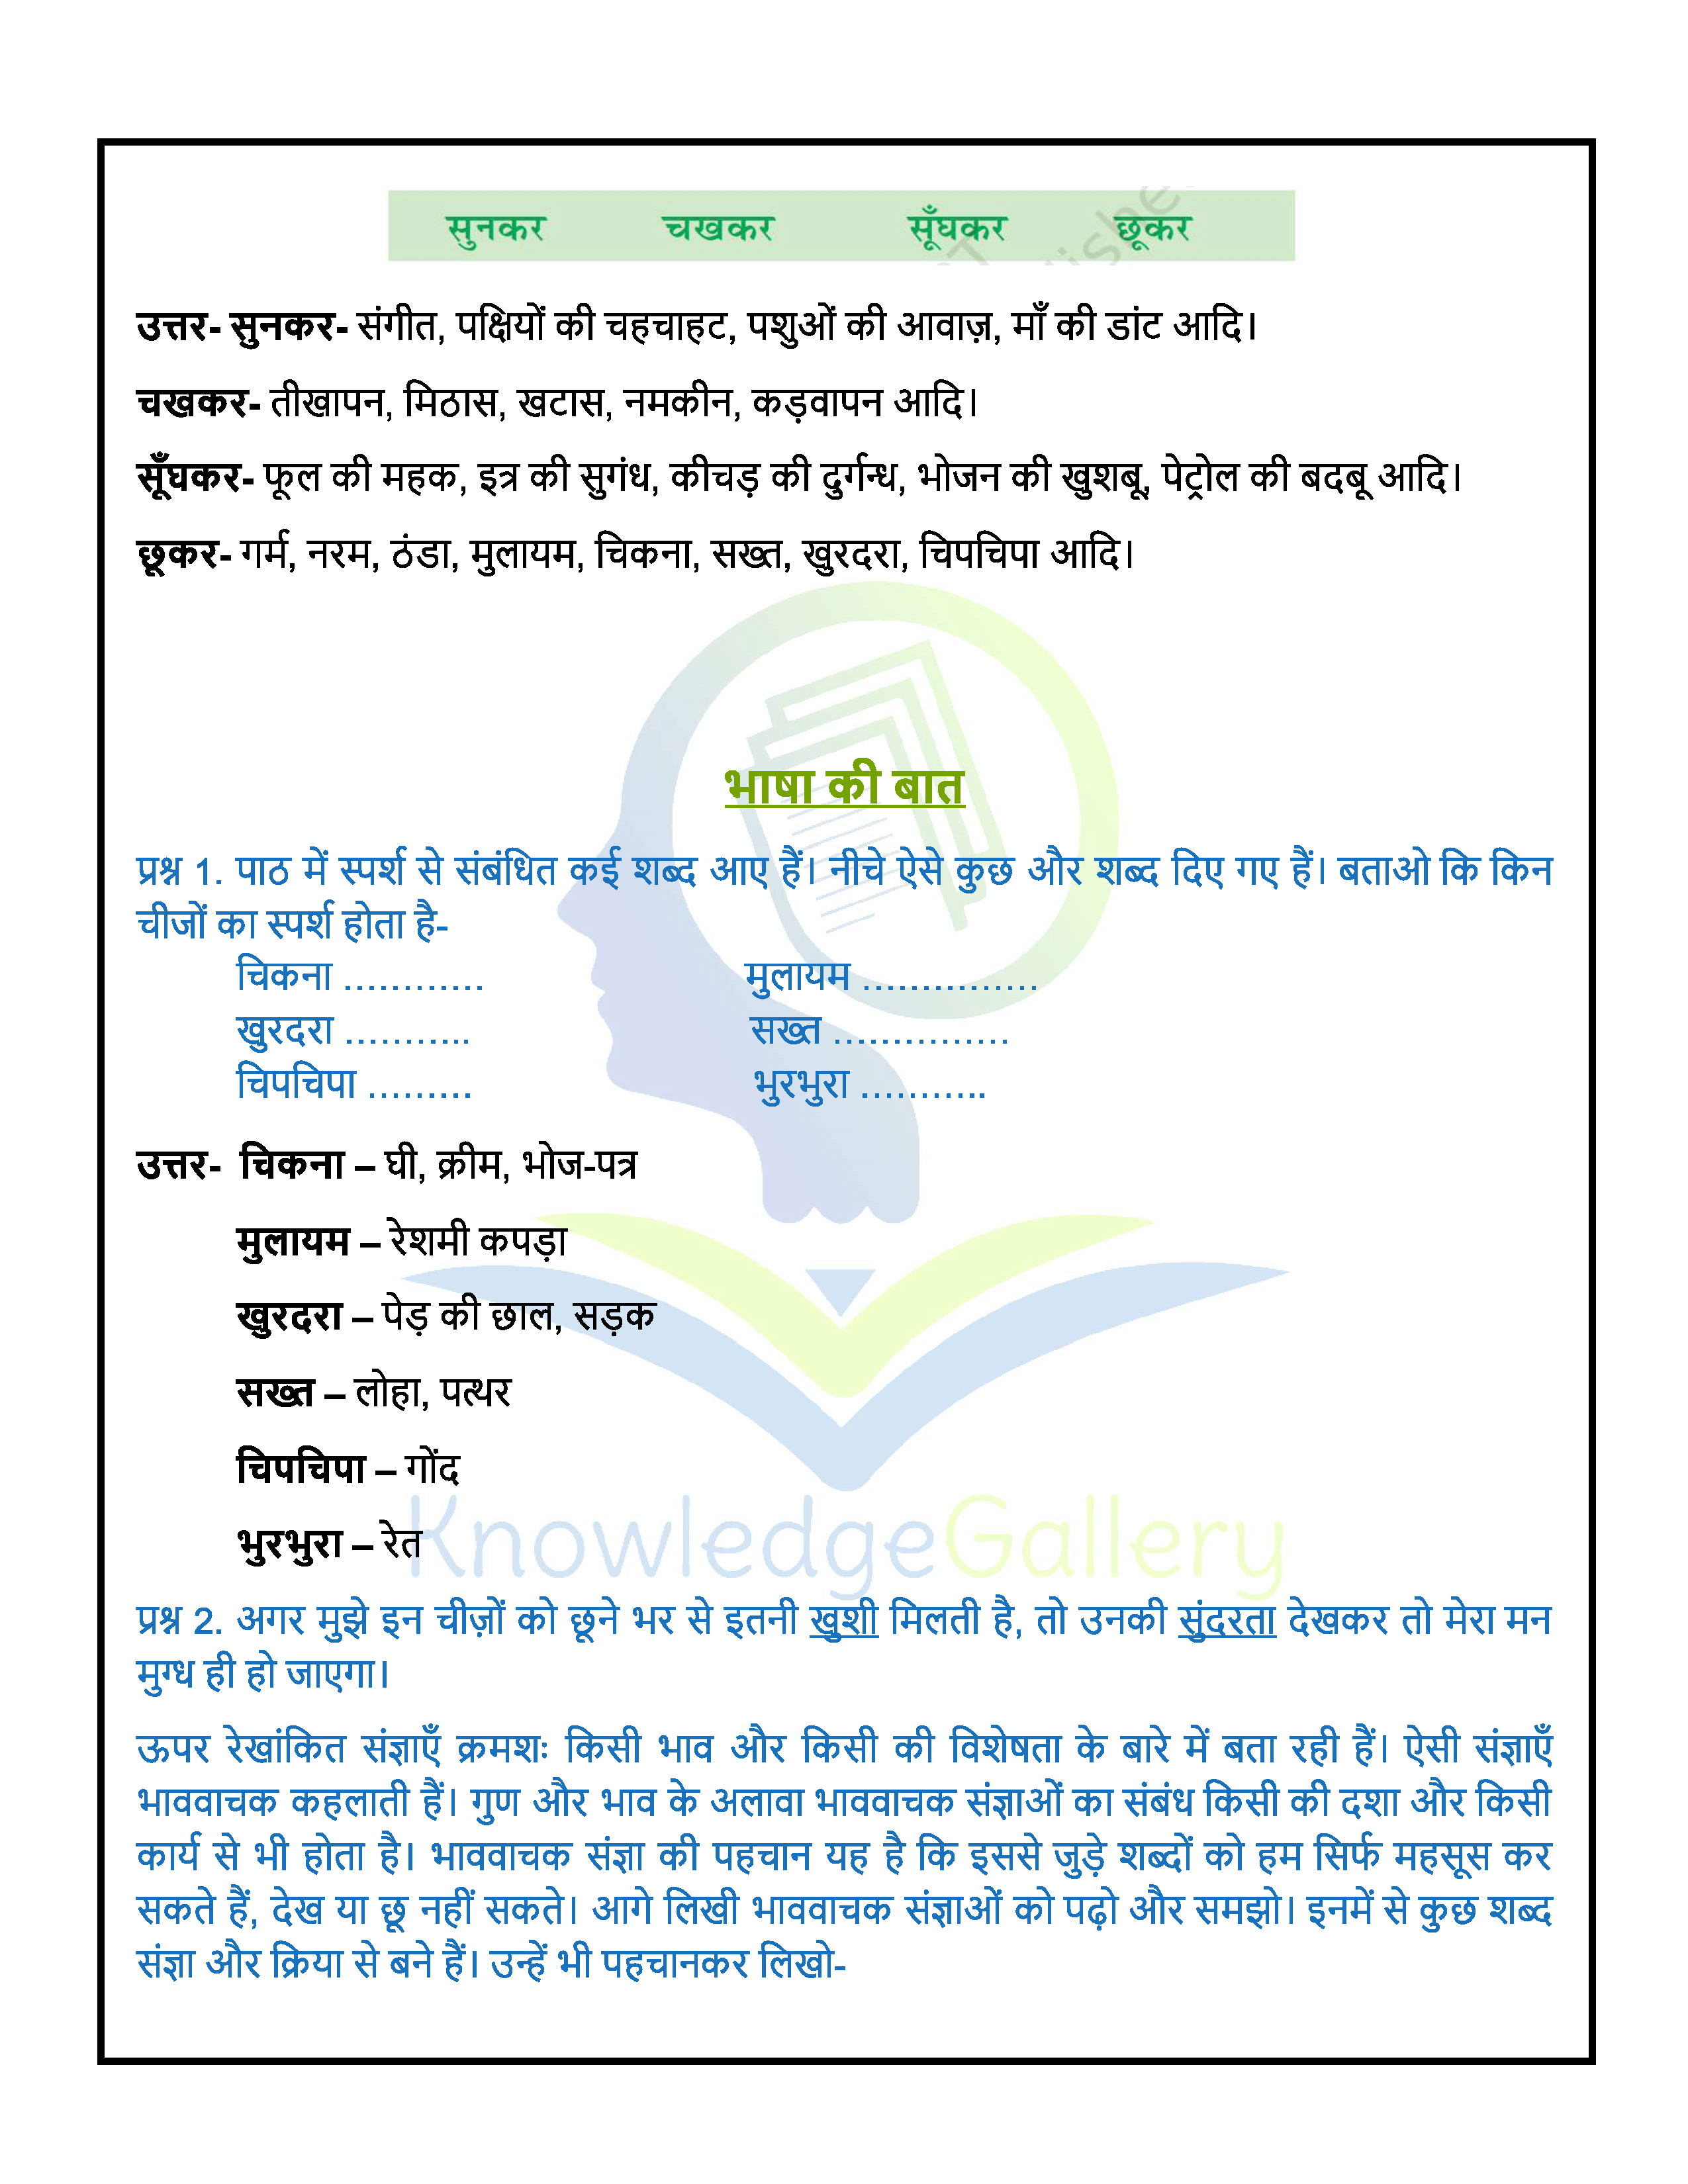 NCERT Solution For Class 6 Hindi Chapter 11 part 3